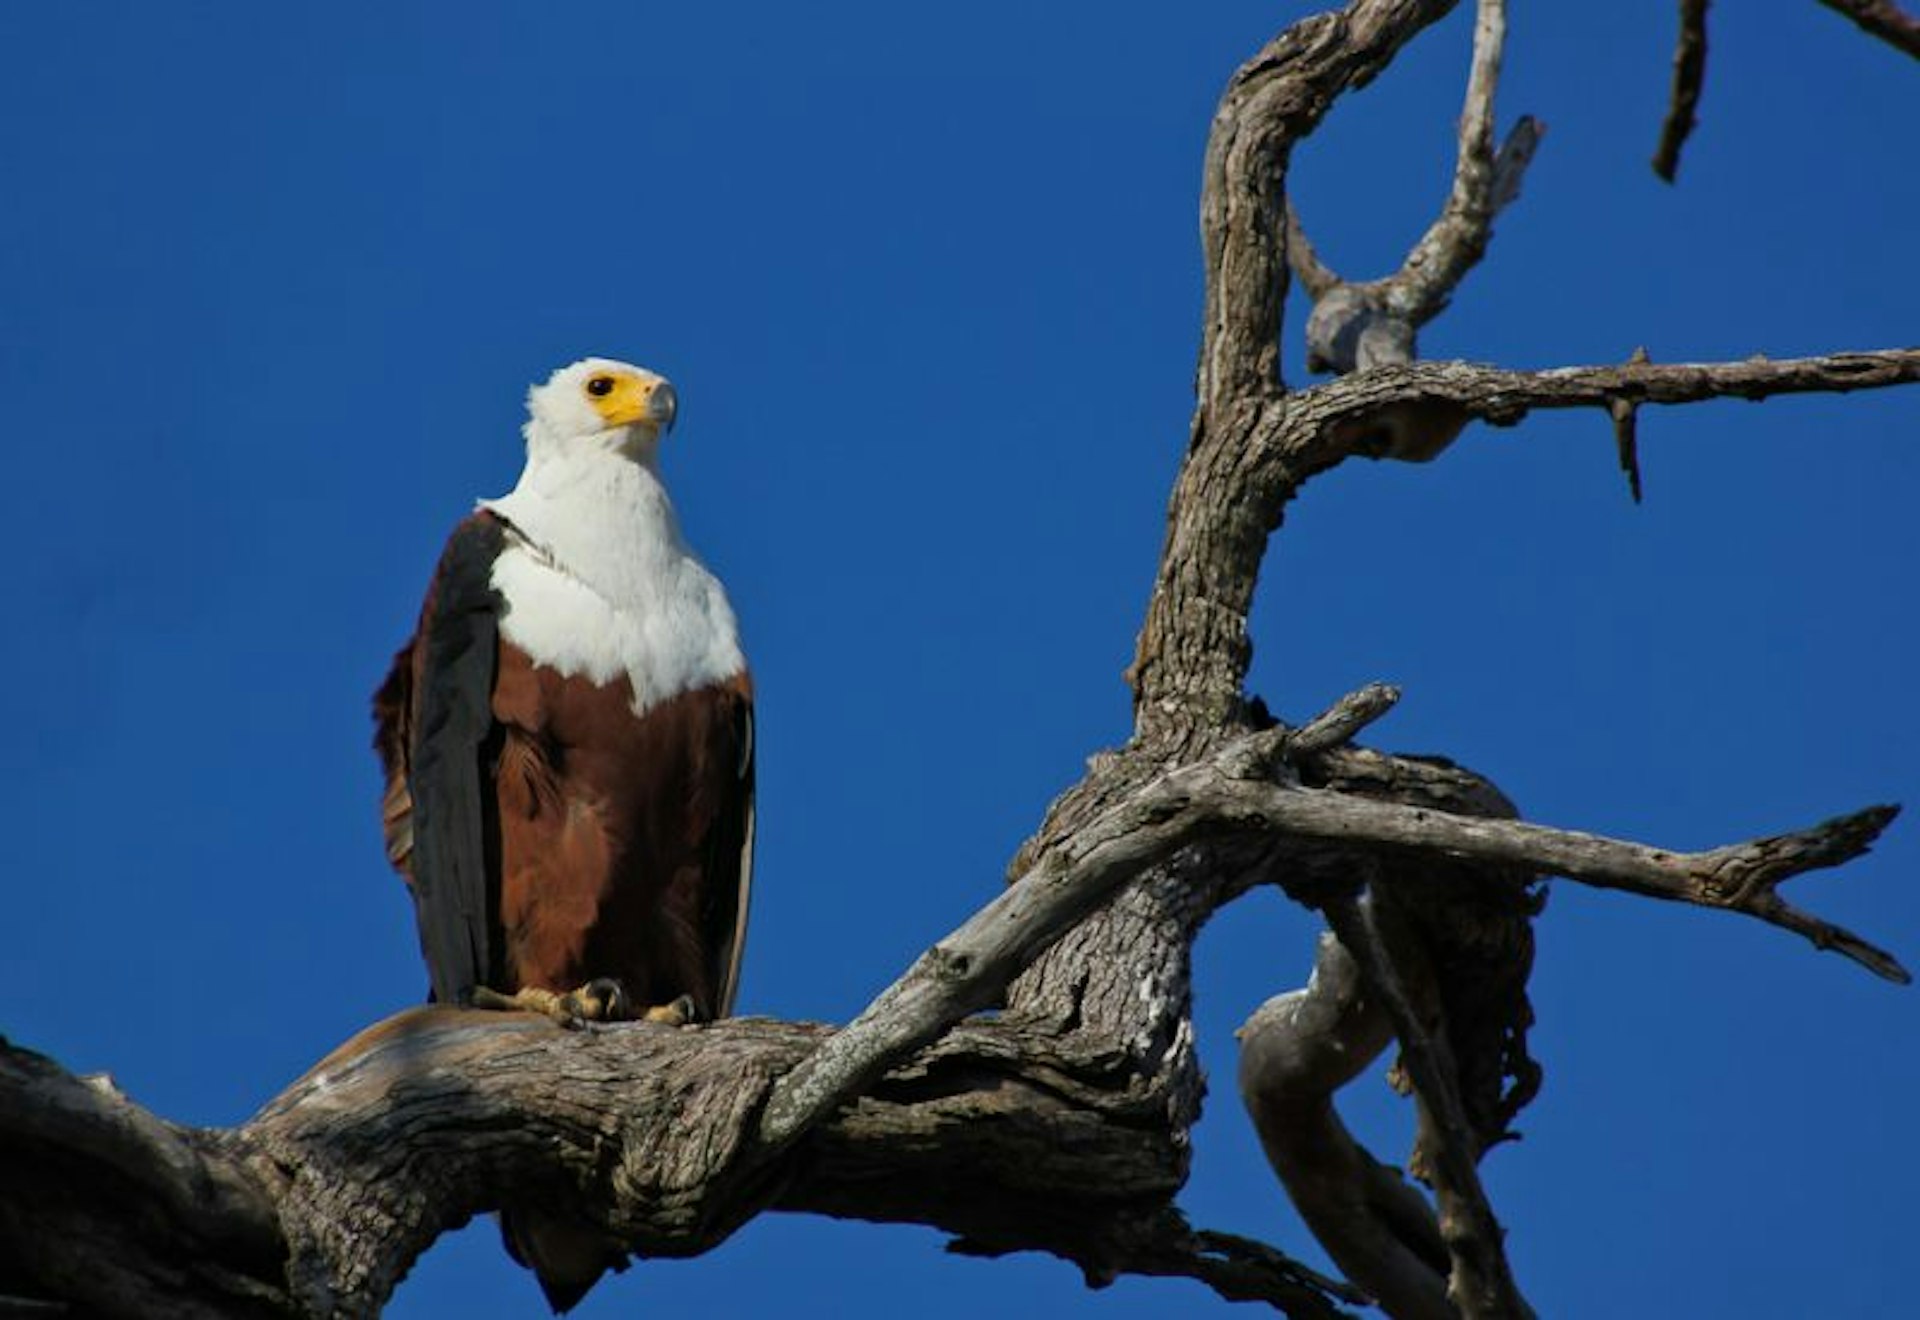 An Eagle stands on a tree trunk in Chobe National Park, Botswana 